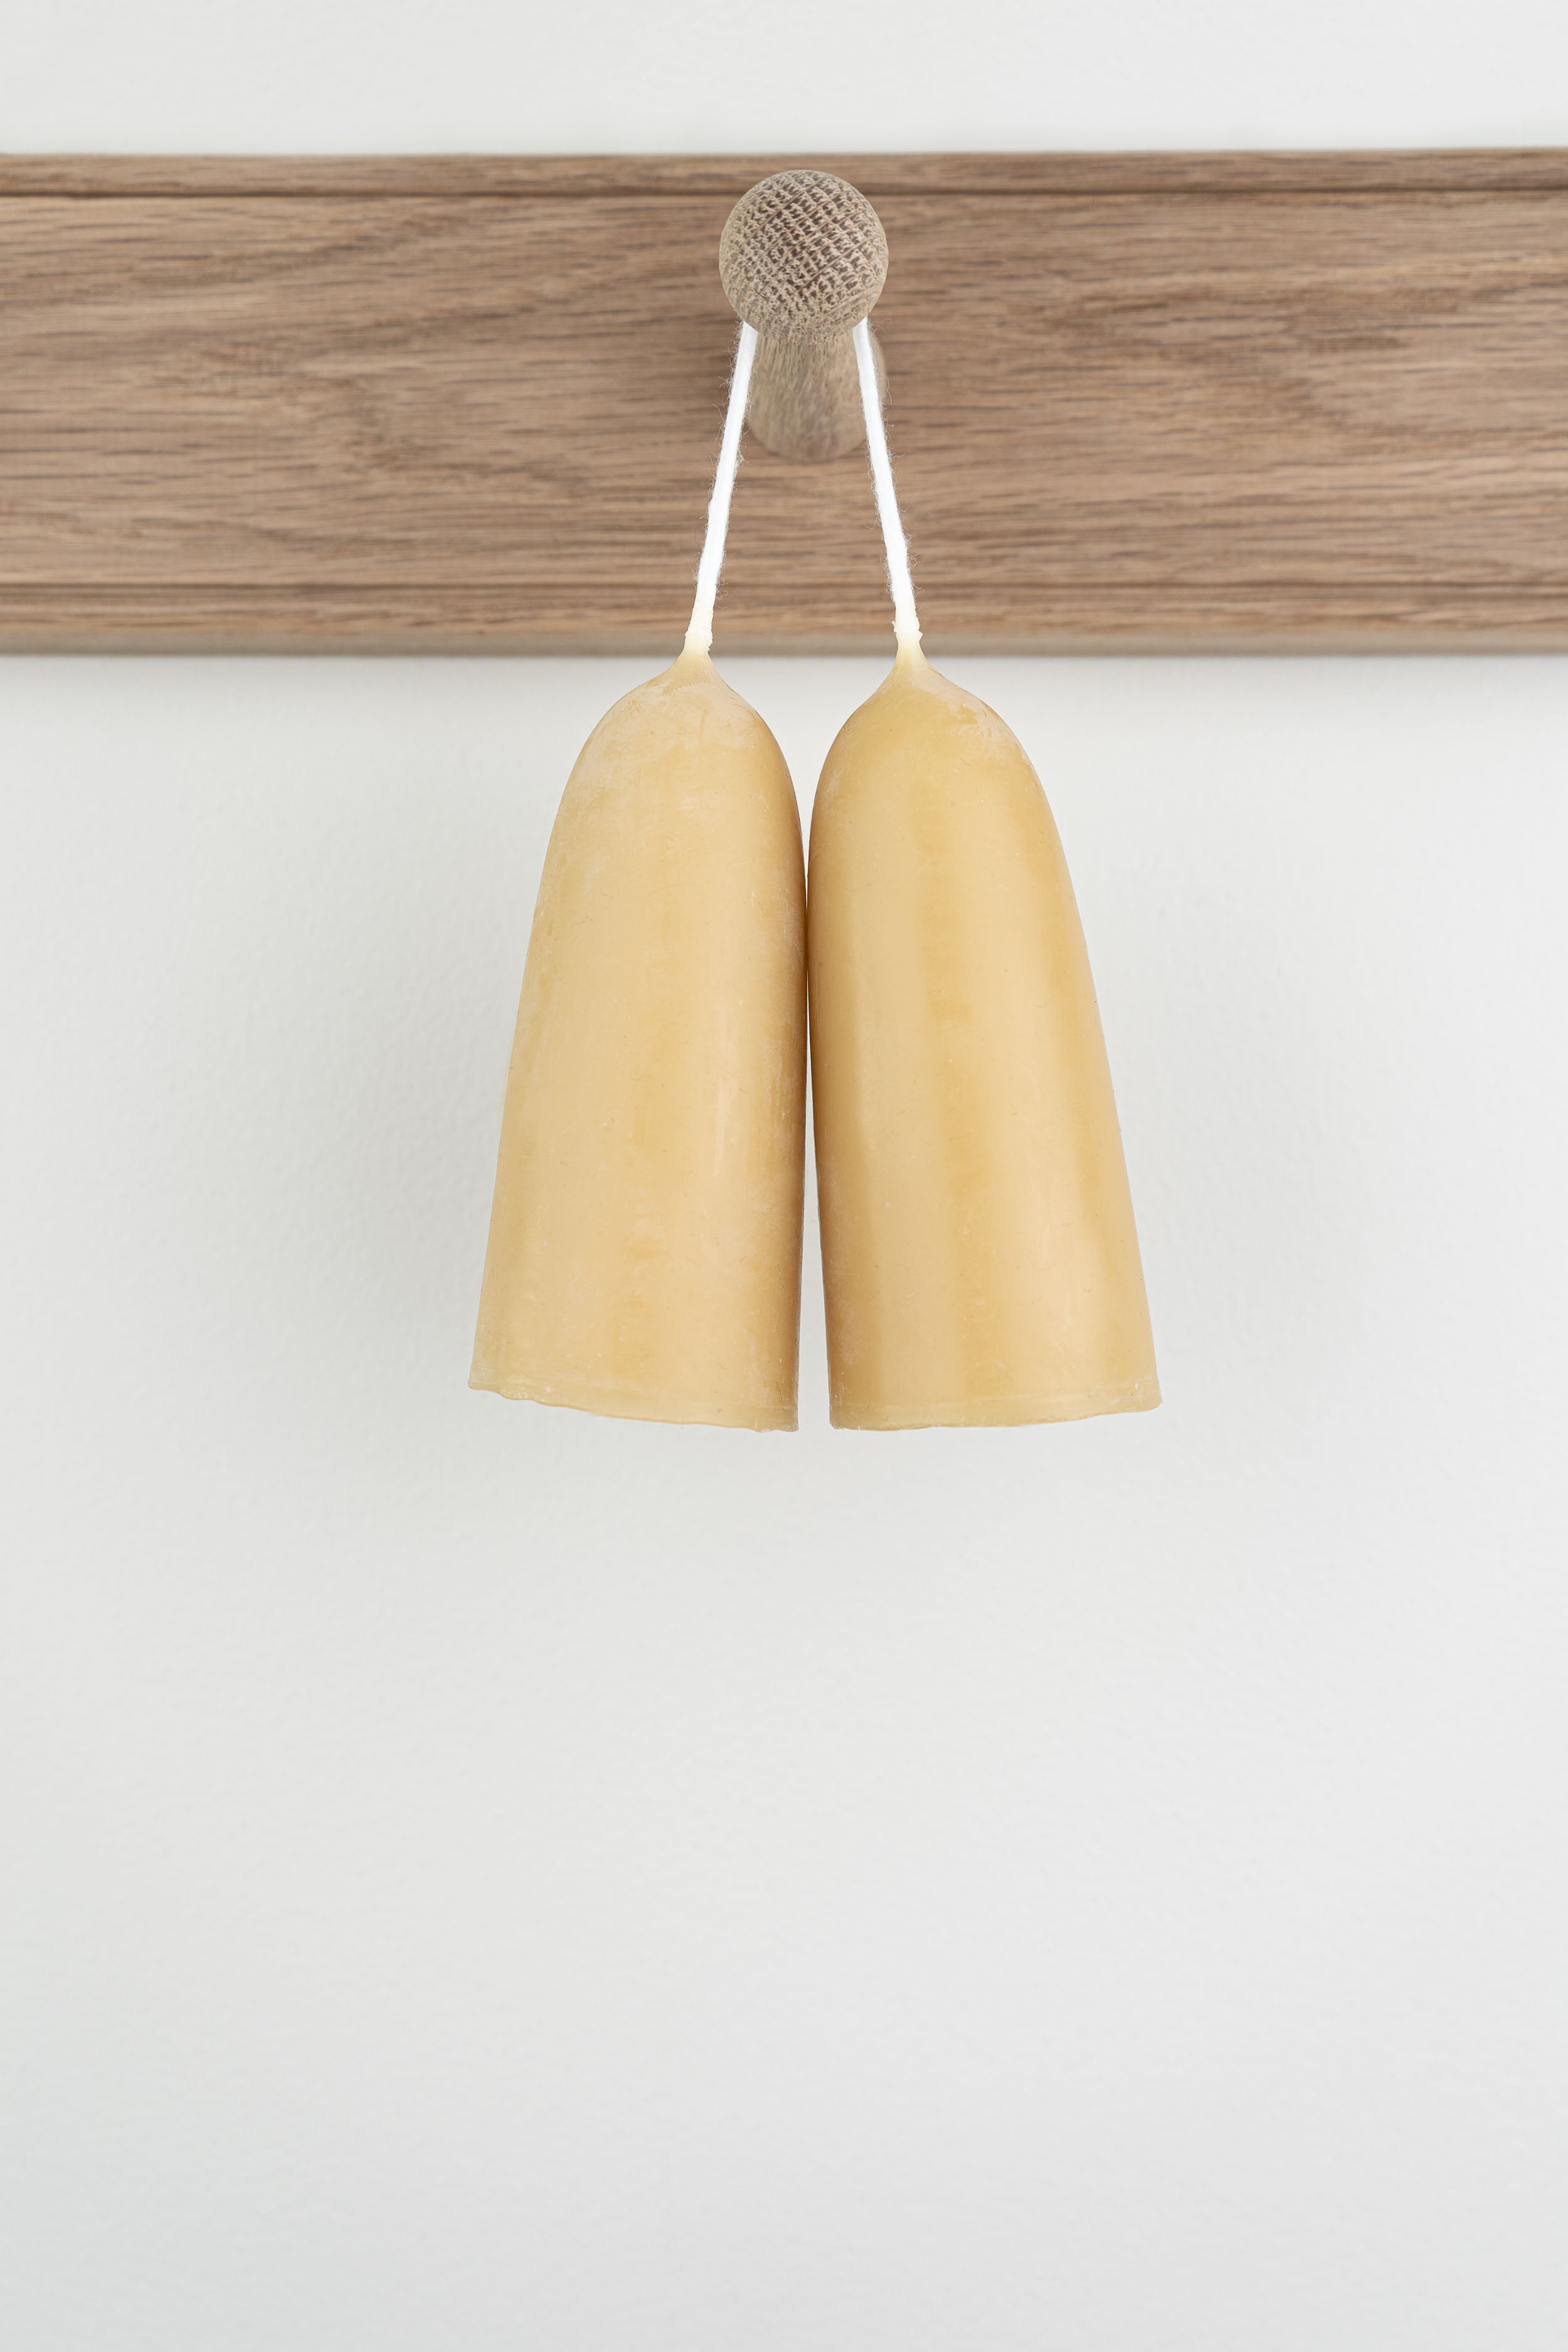 Hand Dipped Beeswax Candle, Stumpie